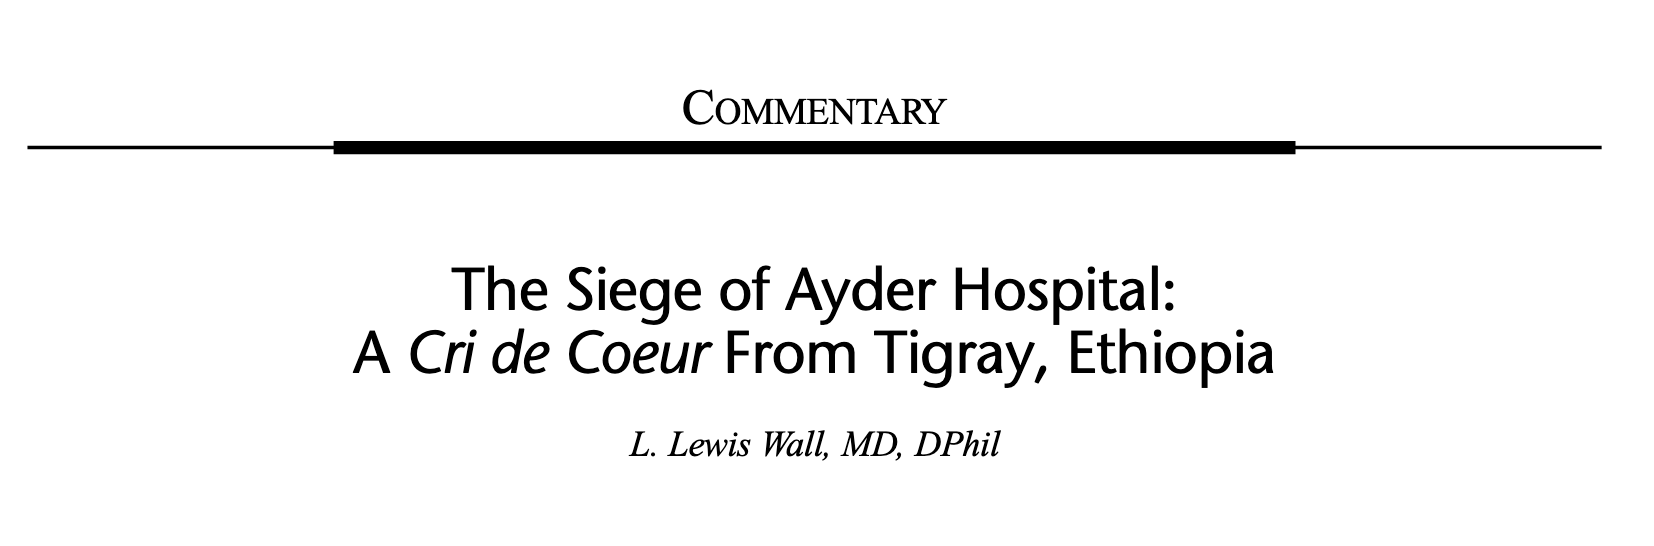 The siege of Ayder Hospital - Lewis Wall